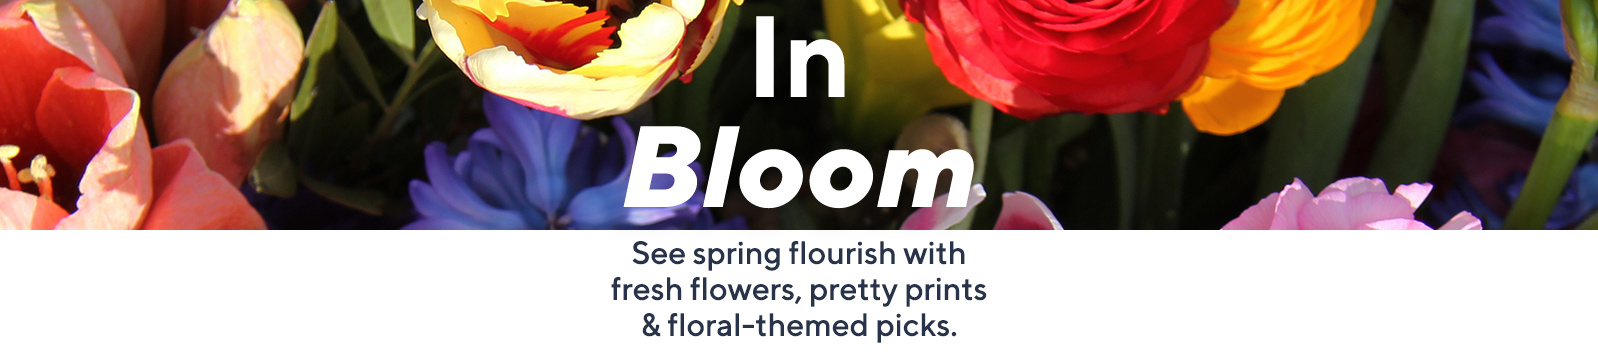 In Bloom  Let the sunshine in  See spring flourish with fresh flowers, pretty prints & floral-themed picks